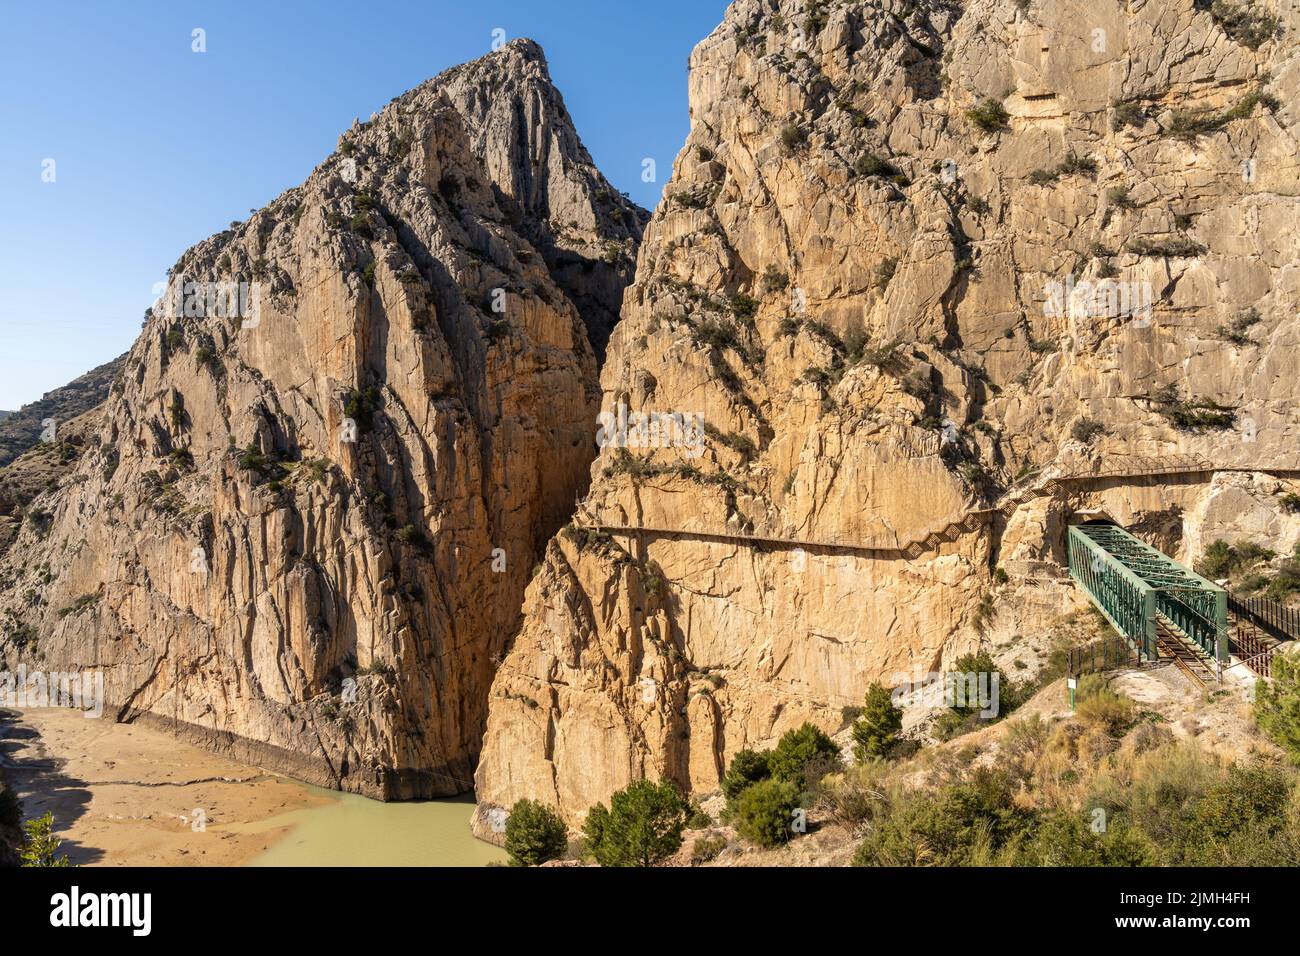 A view of the famous and historic Camino del Rey in southern Spain near Malaga Stock Photo